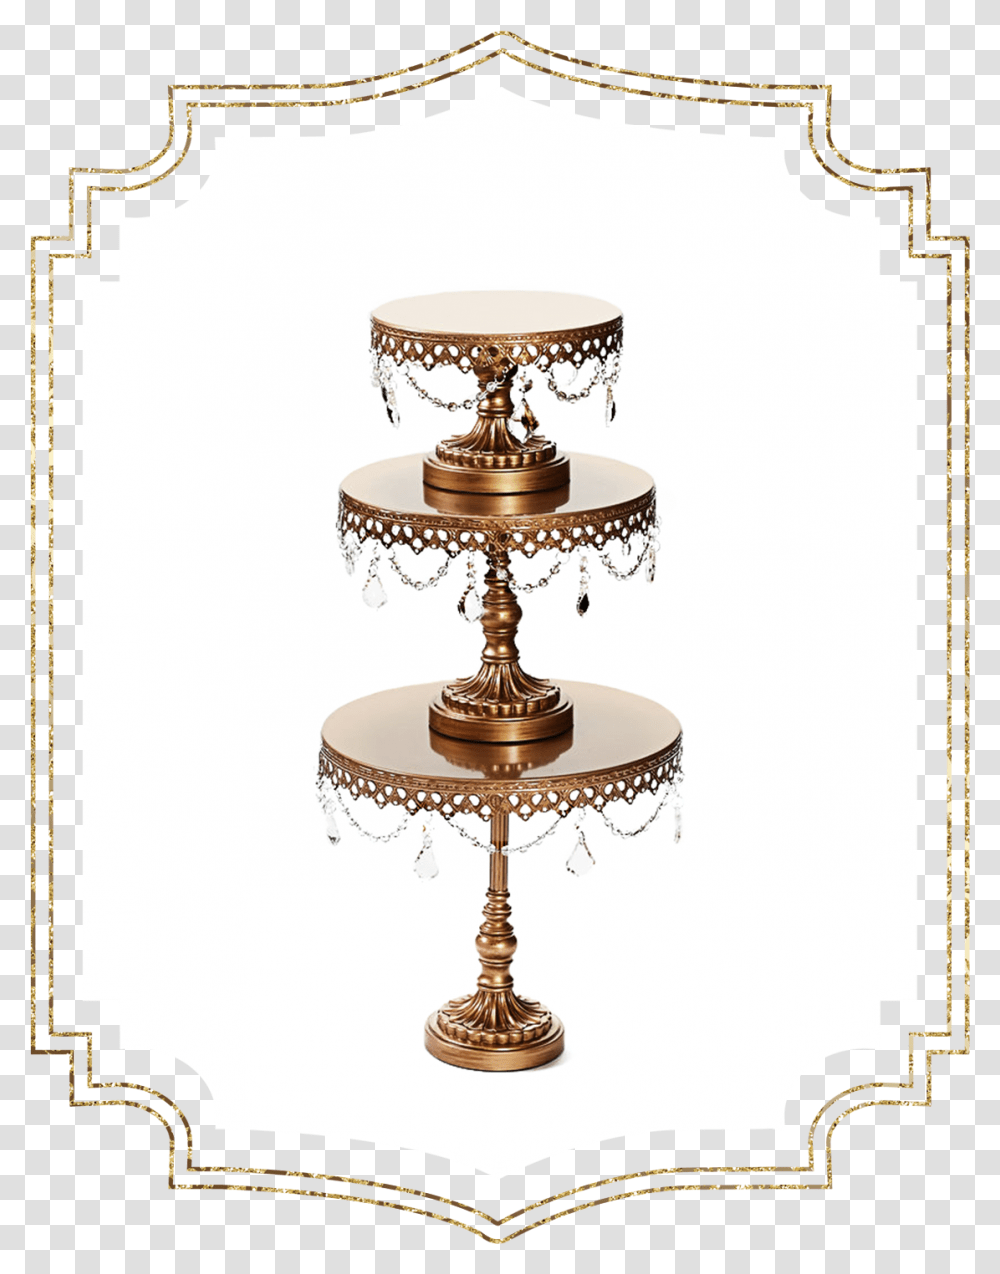 Shop Preview Antique Gold Chandelier Ball Base Cake Pagoda, Lamp, Table Lamp, Bronze, Lampshade Transparent Png